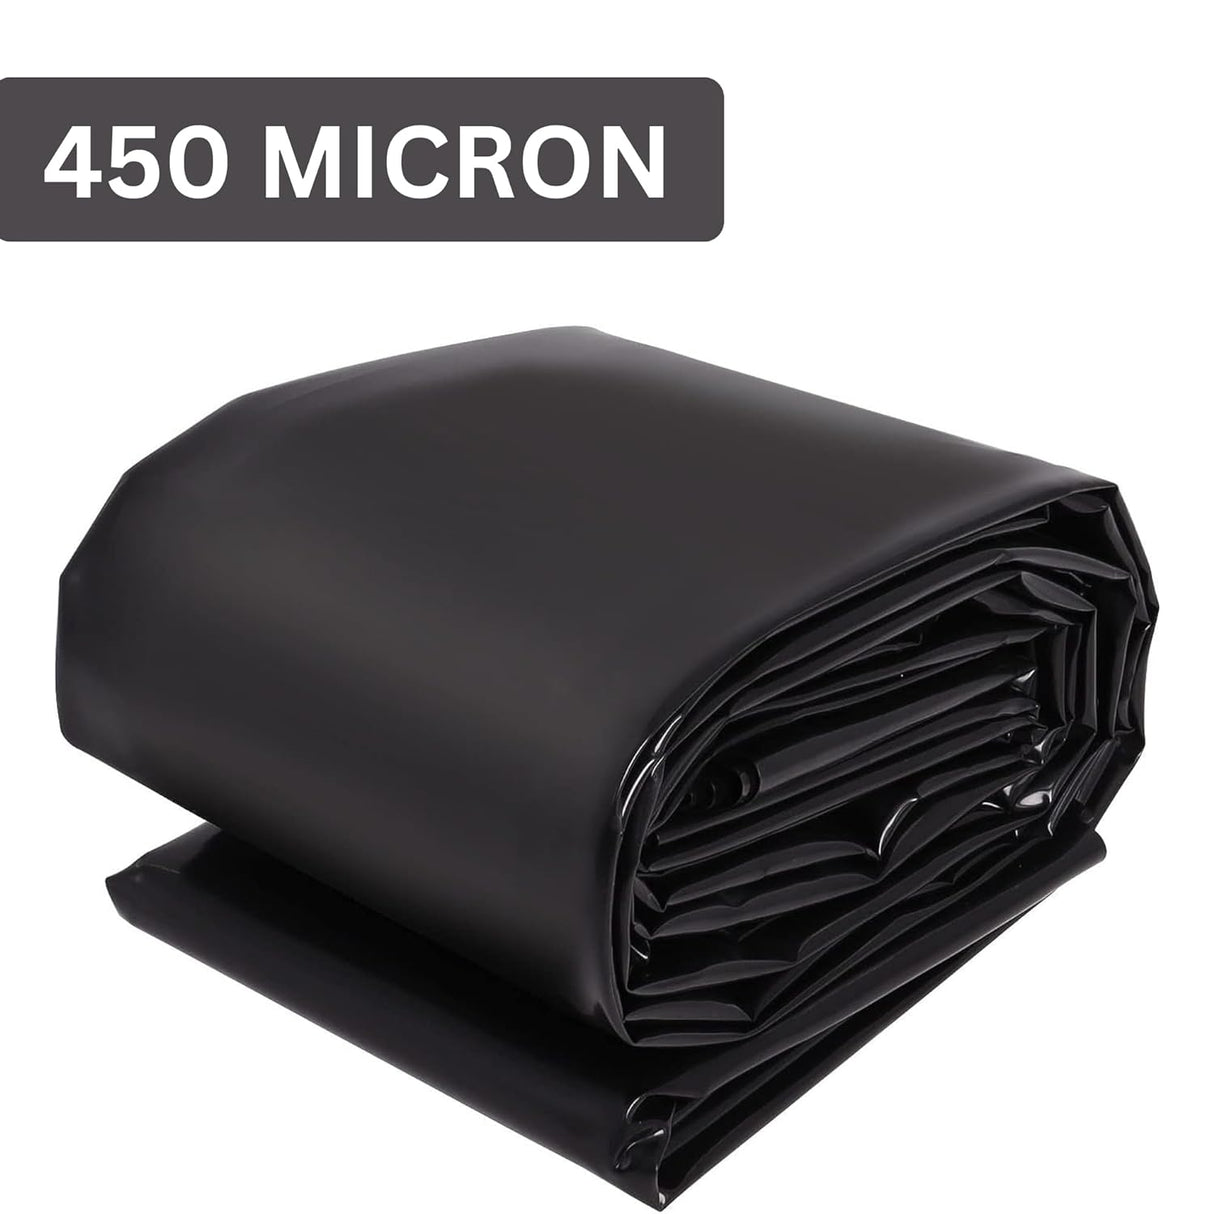 Singhal 450 Micron HDPE Pond Liner Sheet Geomembrane Sheet 2.14ft x 20ft, Heavy Duty Small Garden Backyard Waterfall Lilly Ponds Lining Fabric (Black)